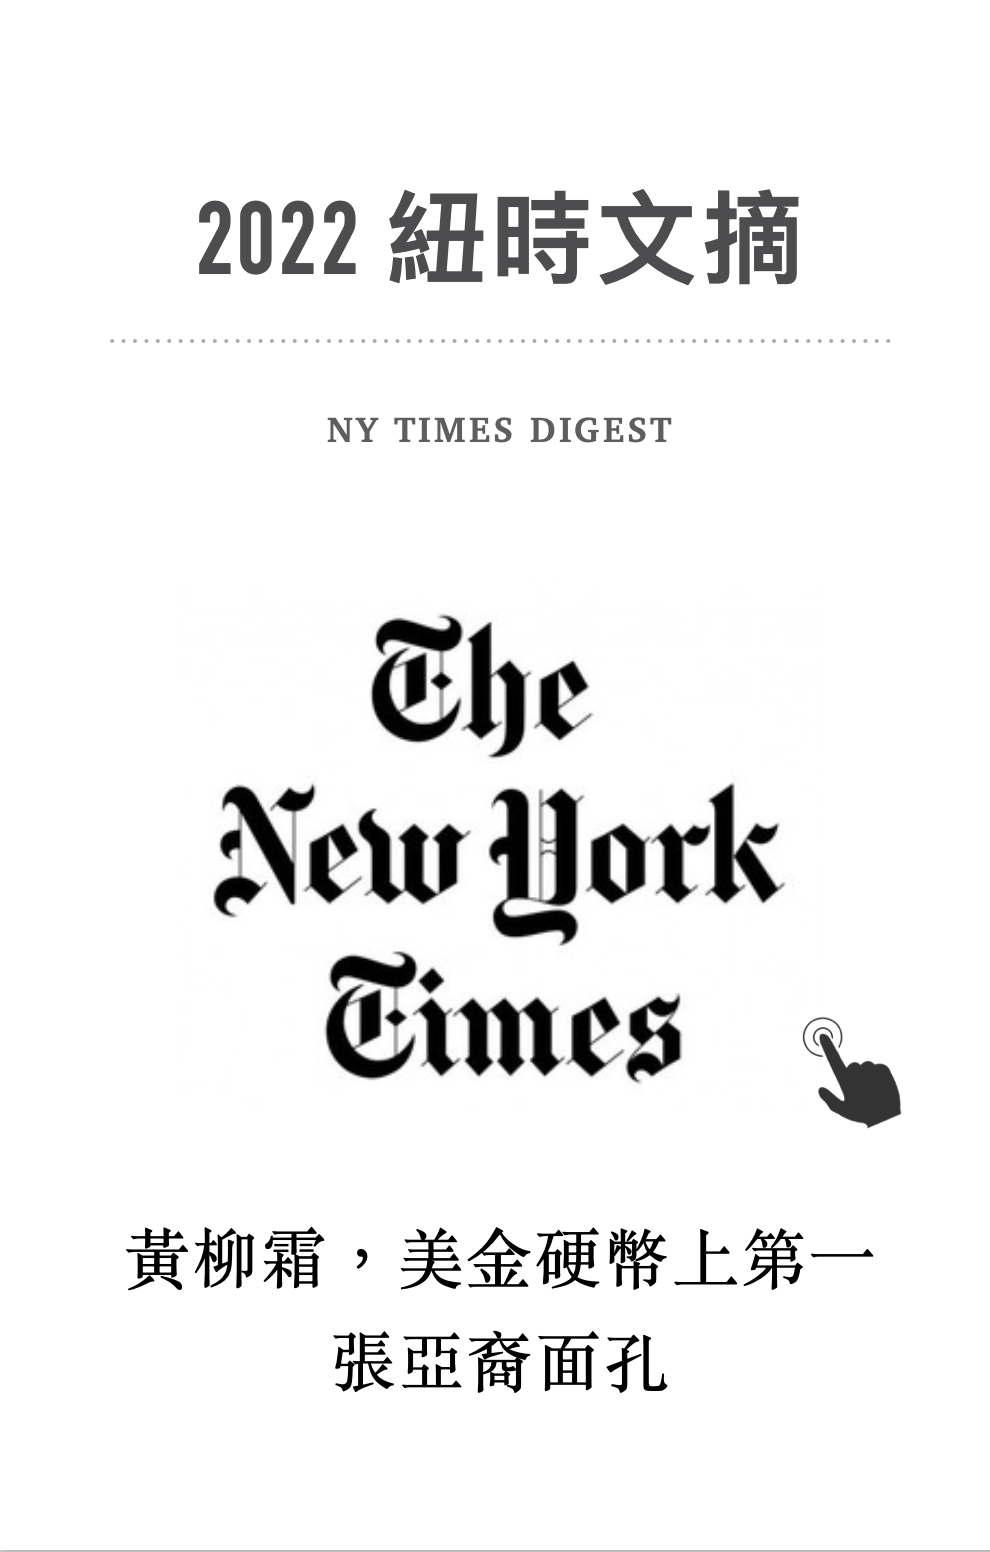 NY Times Digest